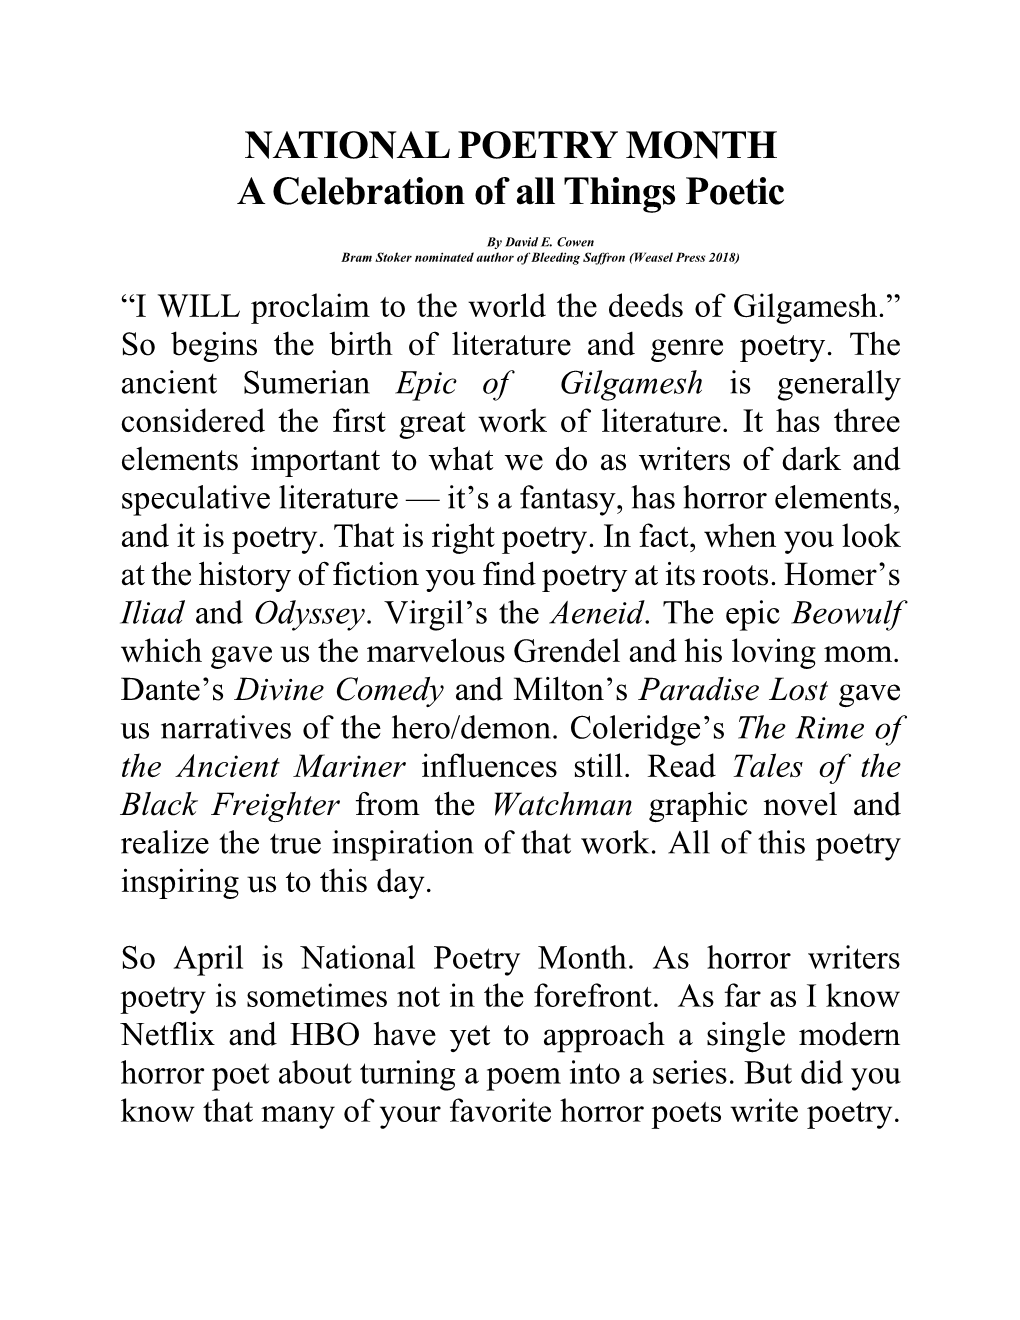 NATIONAL POETRY MONTH a Celebration of All Things Poetic